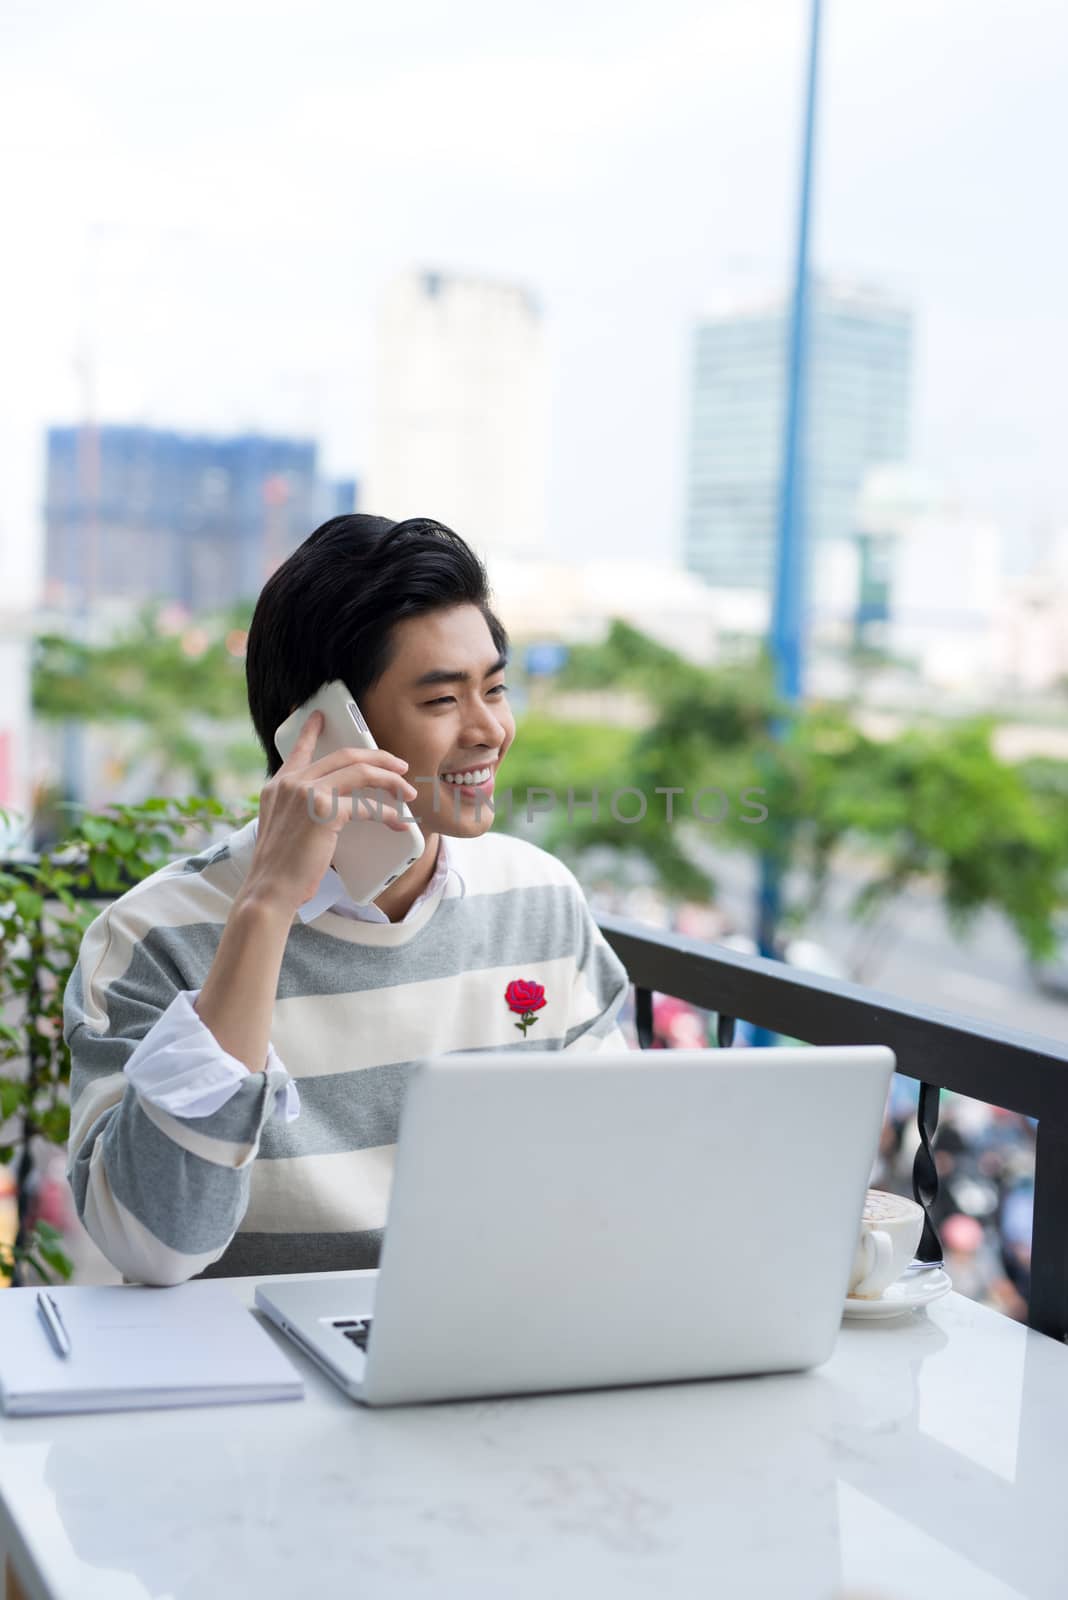 Asian businessman using mobile phone while working with laptop on table in coffee shop